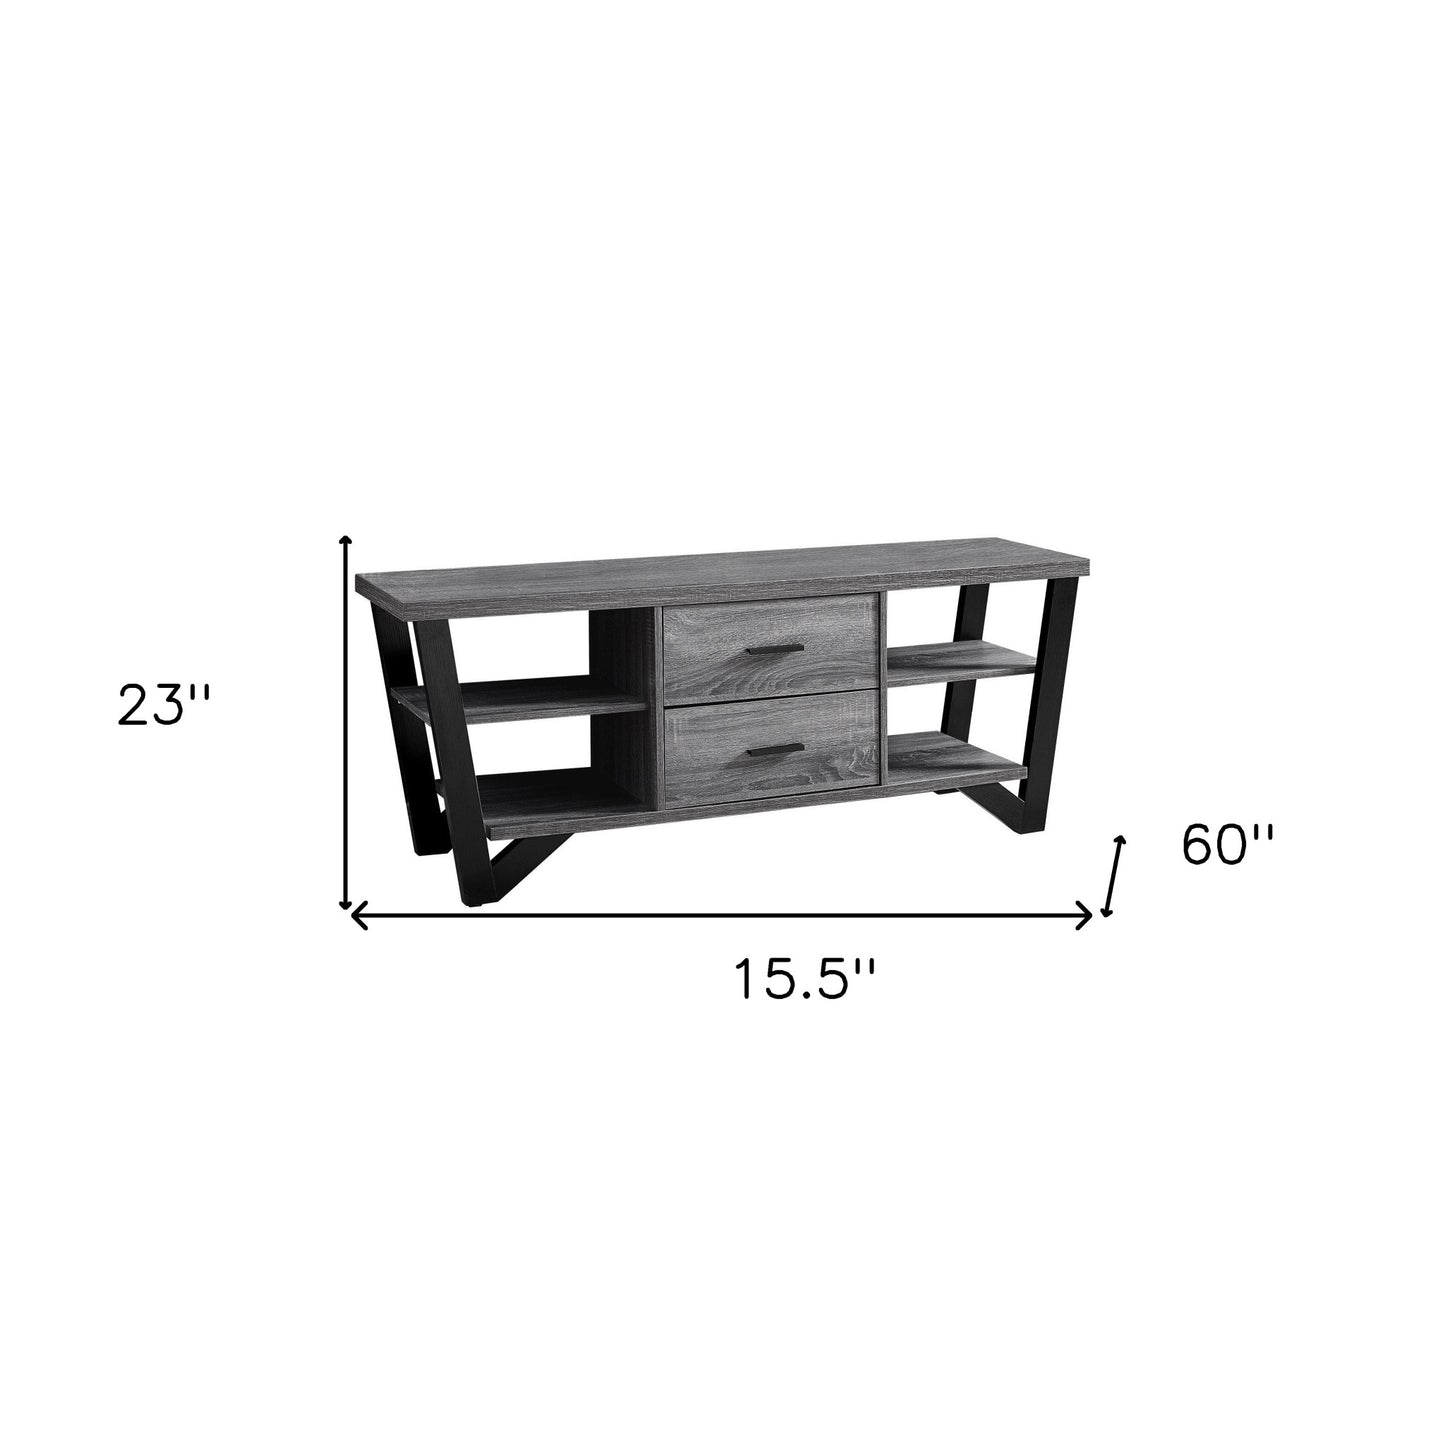 15.5" X 60" X 23" Grey Black Particle Board Hollow Core Metal TV Stand With 2 Drawers